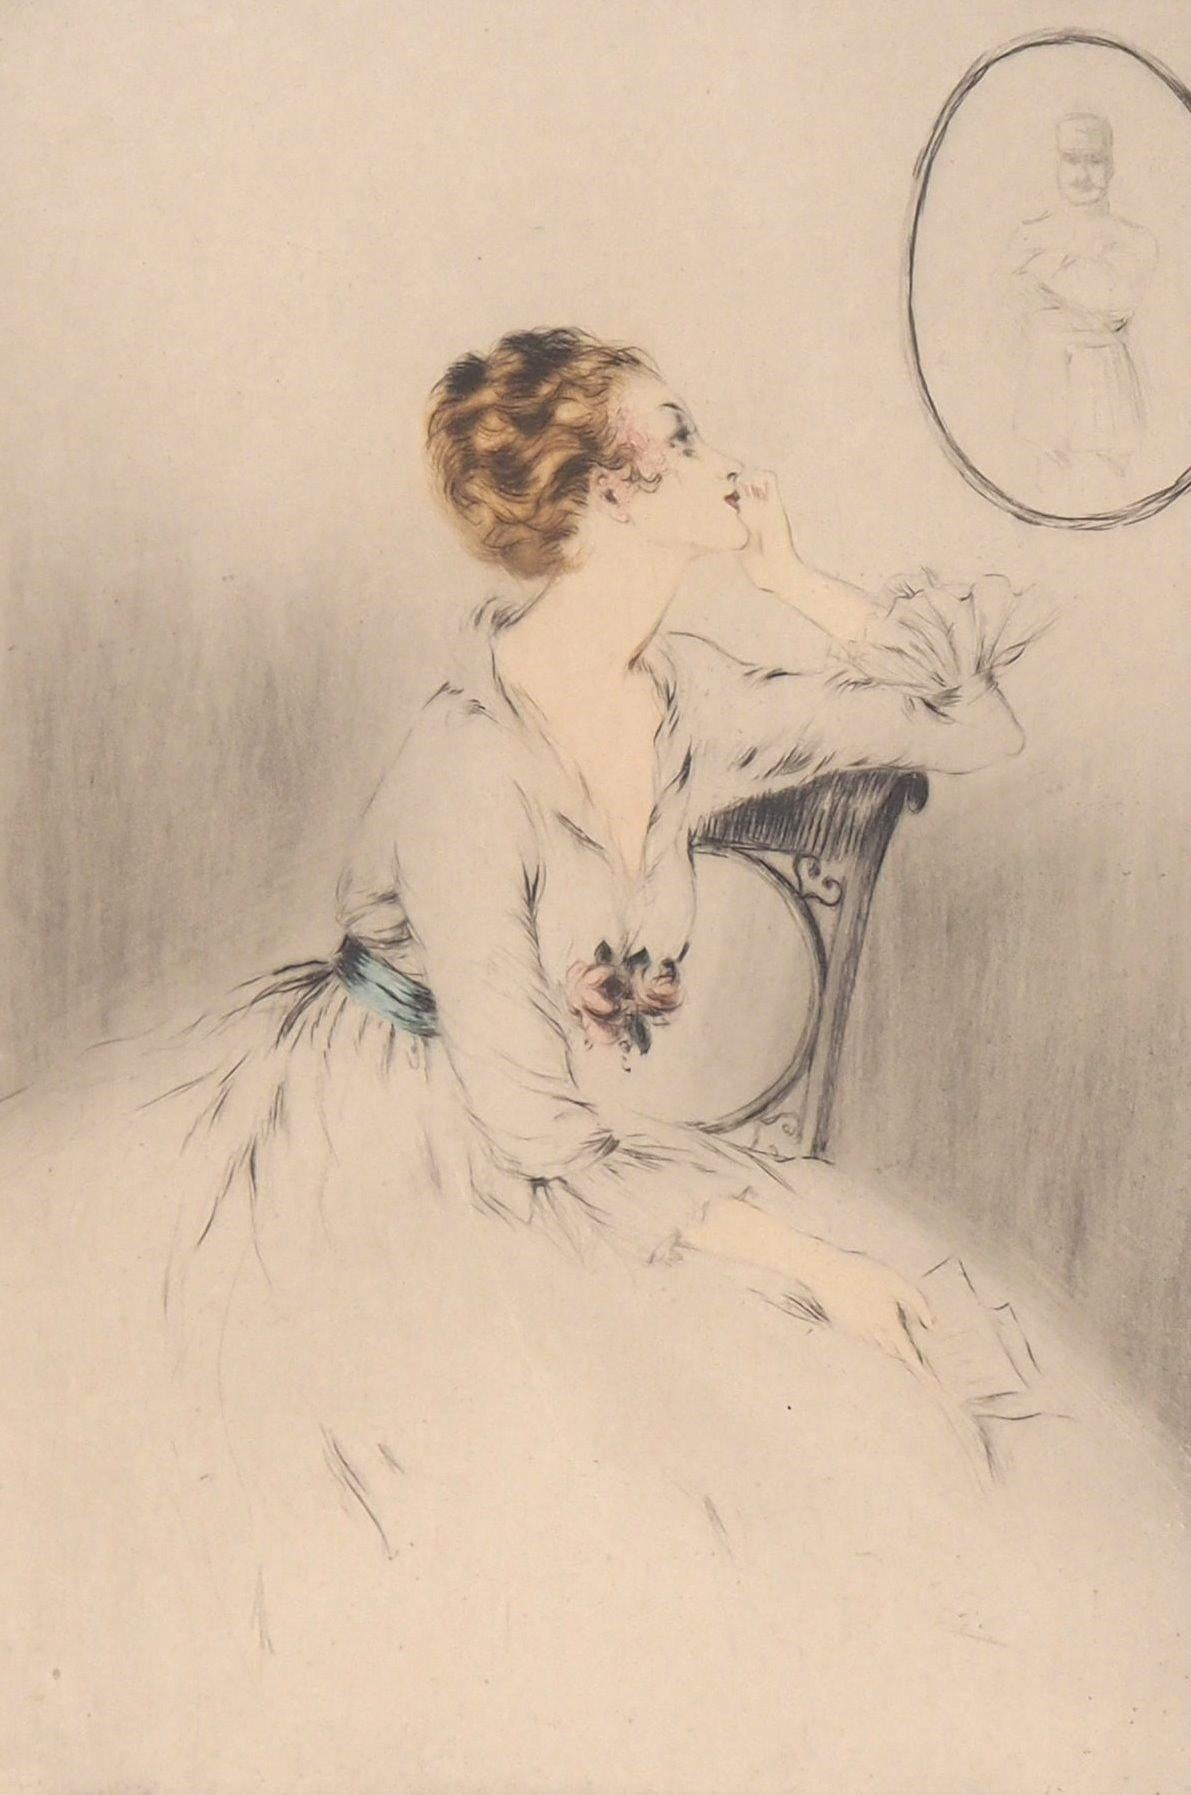 Wife Waiting for Her Husband - Original Handsigned Etching & Watercolor - Art Deco Print by Louis Icart